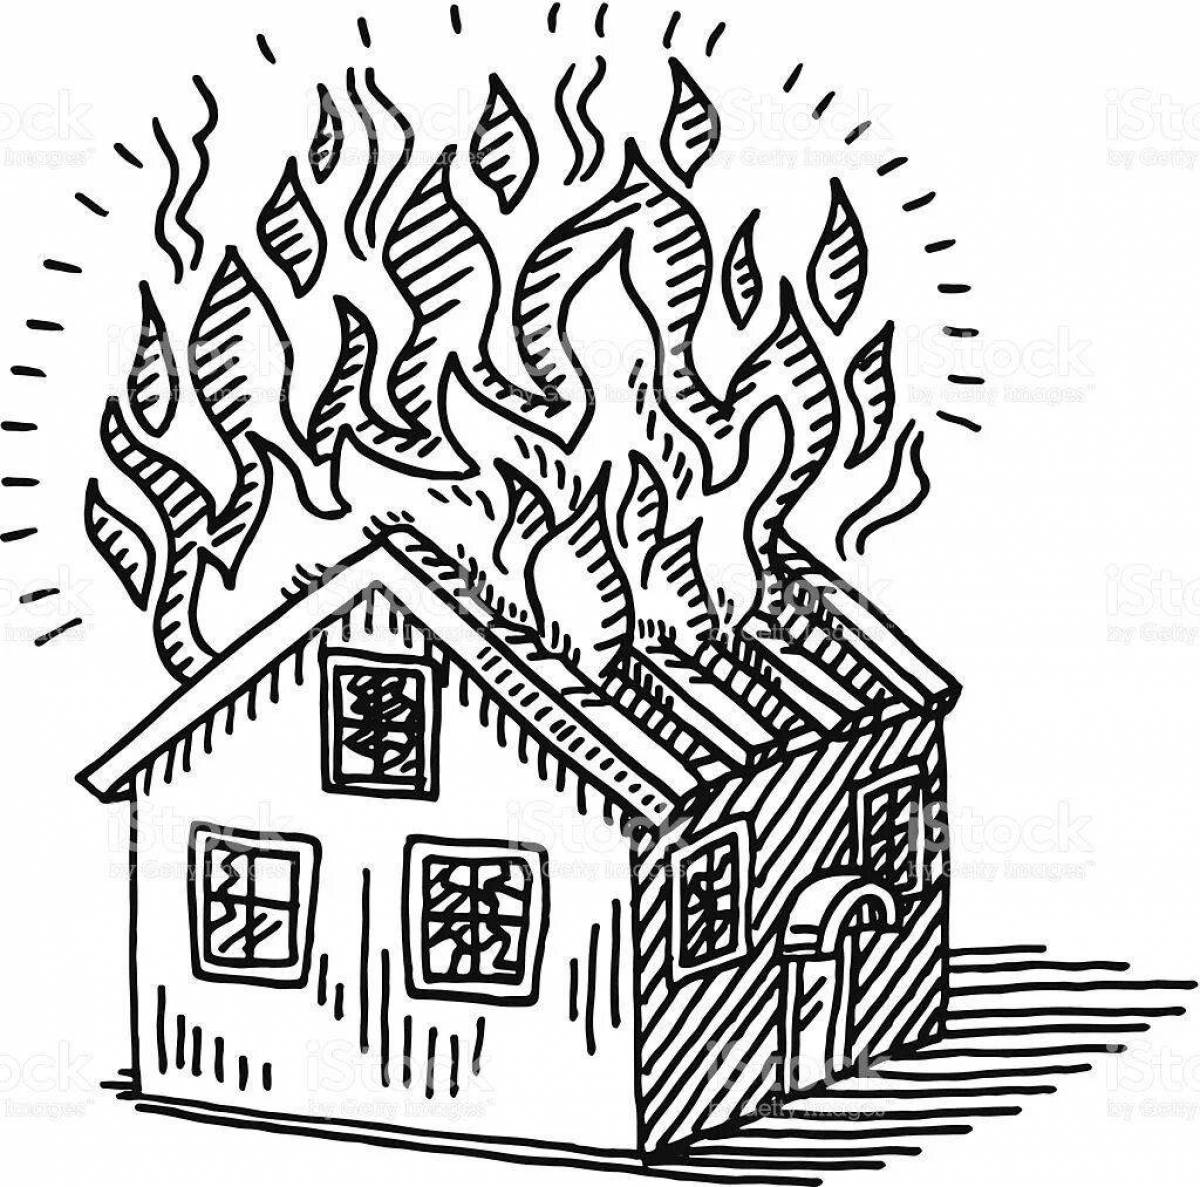 Great burning house coloring book for kids